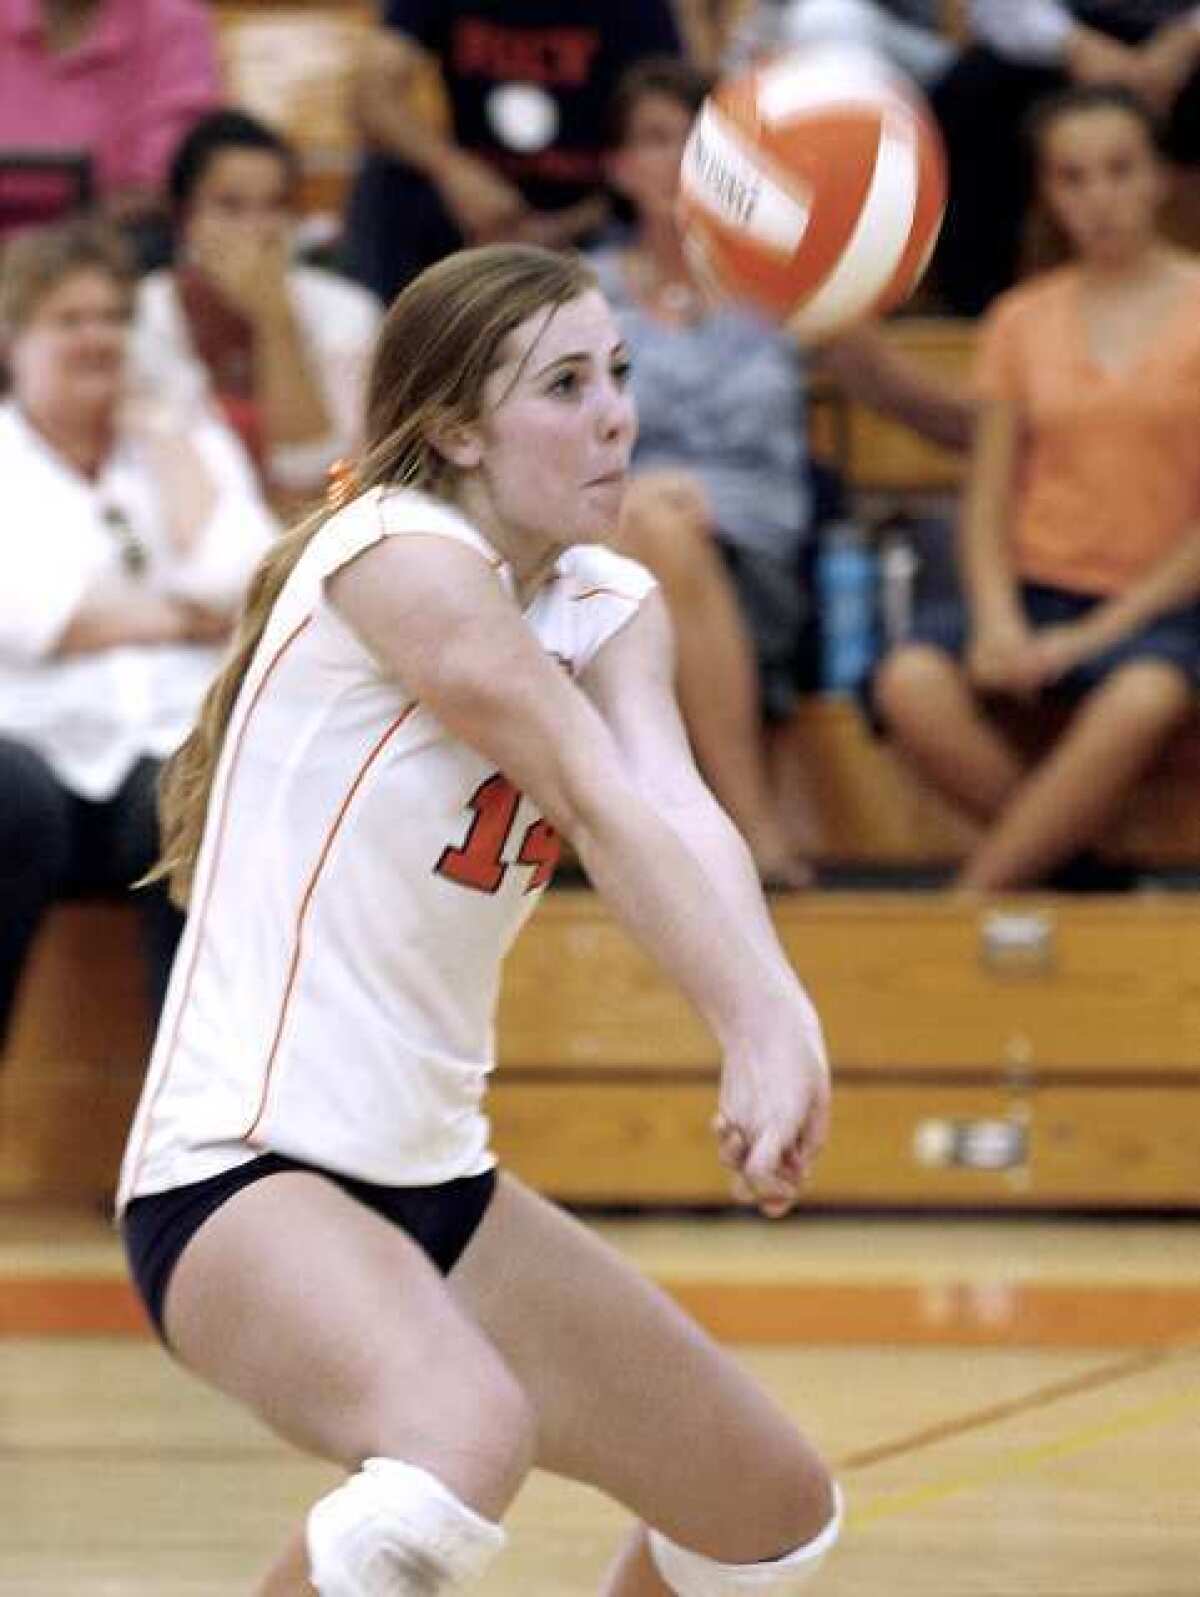 ARCHIVE PHOTO: Pasadena Poly sophomore DeeDee Logan finished with 317 kills and 340 digs and was named to All-Prep League and All-CIF first team.